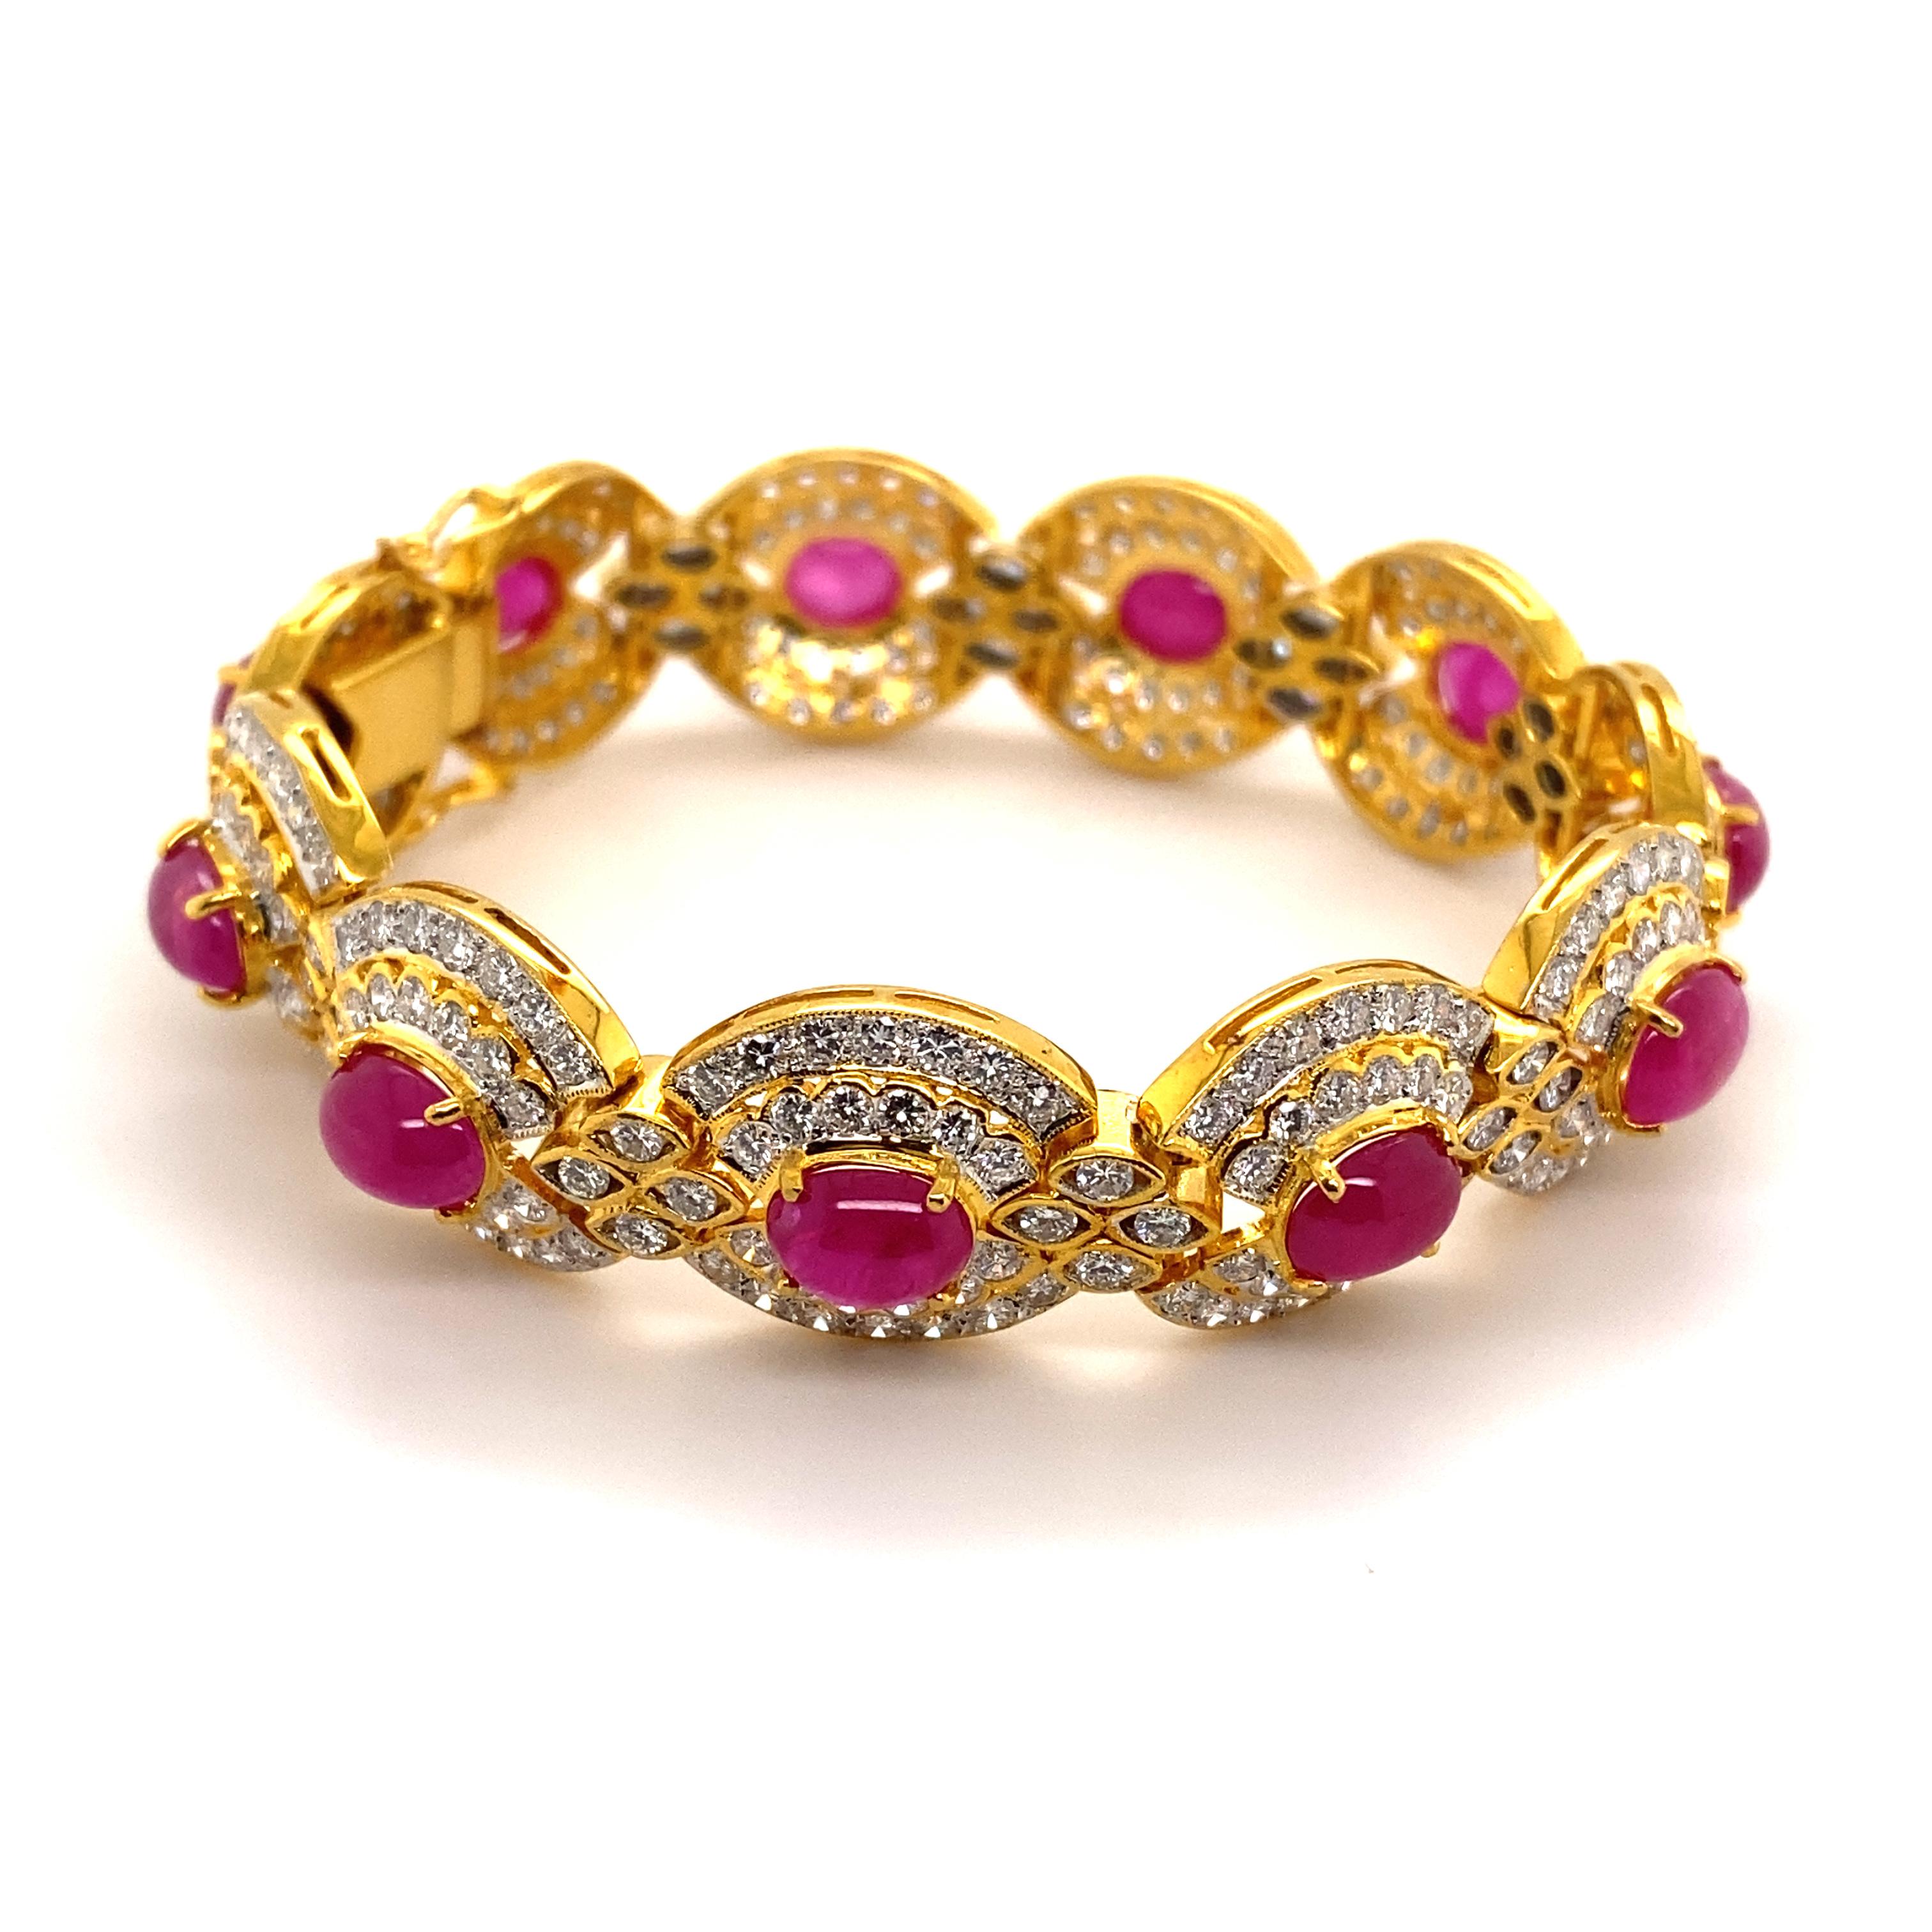 This magnificent bracelet is set with 11 oval-shaped ruby cabochons with a total weight of approximately 16.50 carats. The rubies are surrounded by a sparkling double-row entourage set with a total of 350 brilliant-cut diamonds of G/H colour and vs